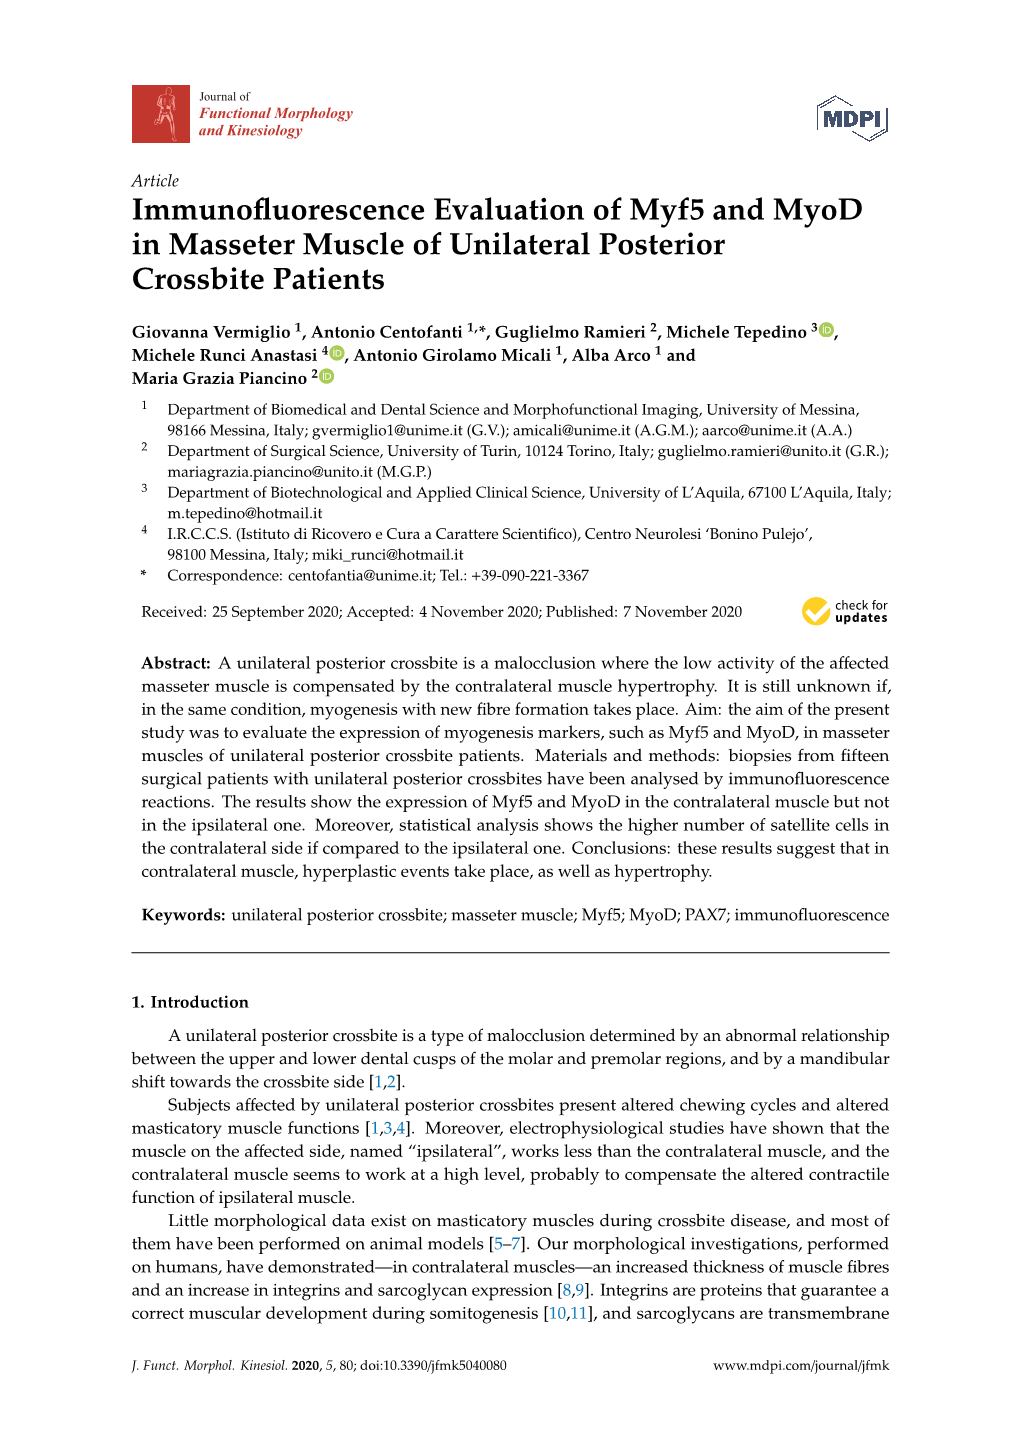 Immunofluorescence Evaluation of Myf5 and Myod in Masseter Muscle